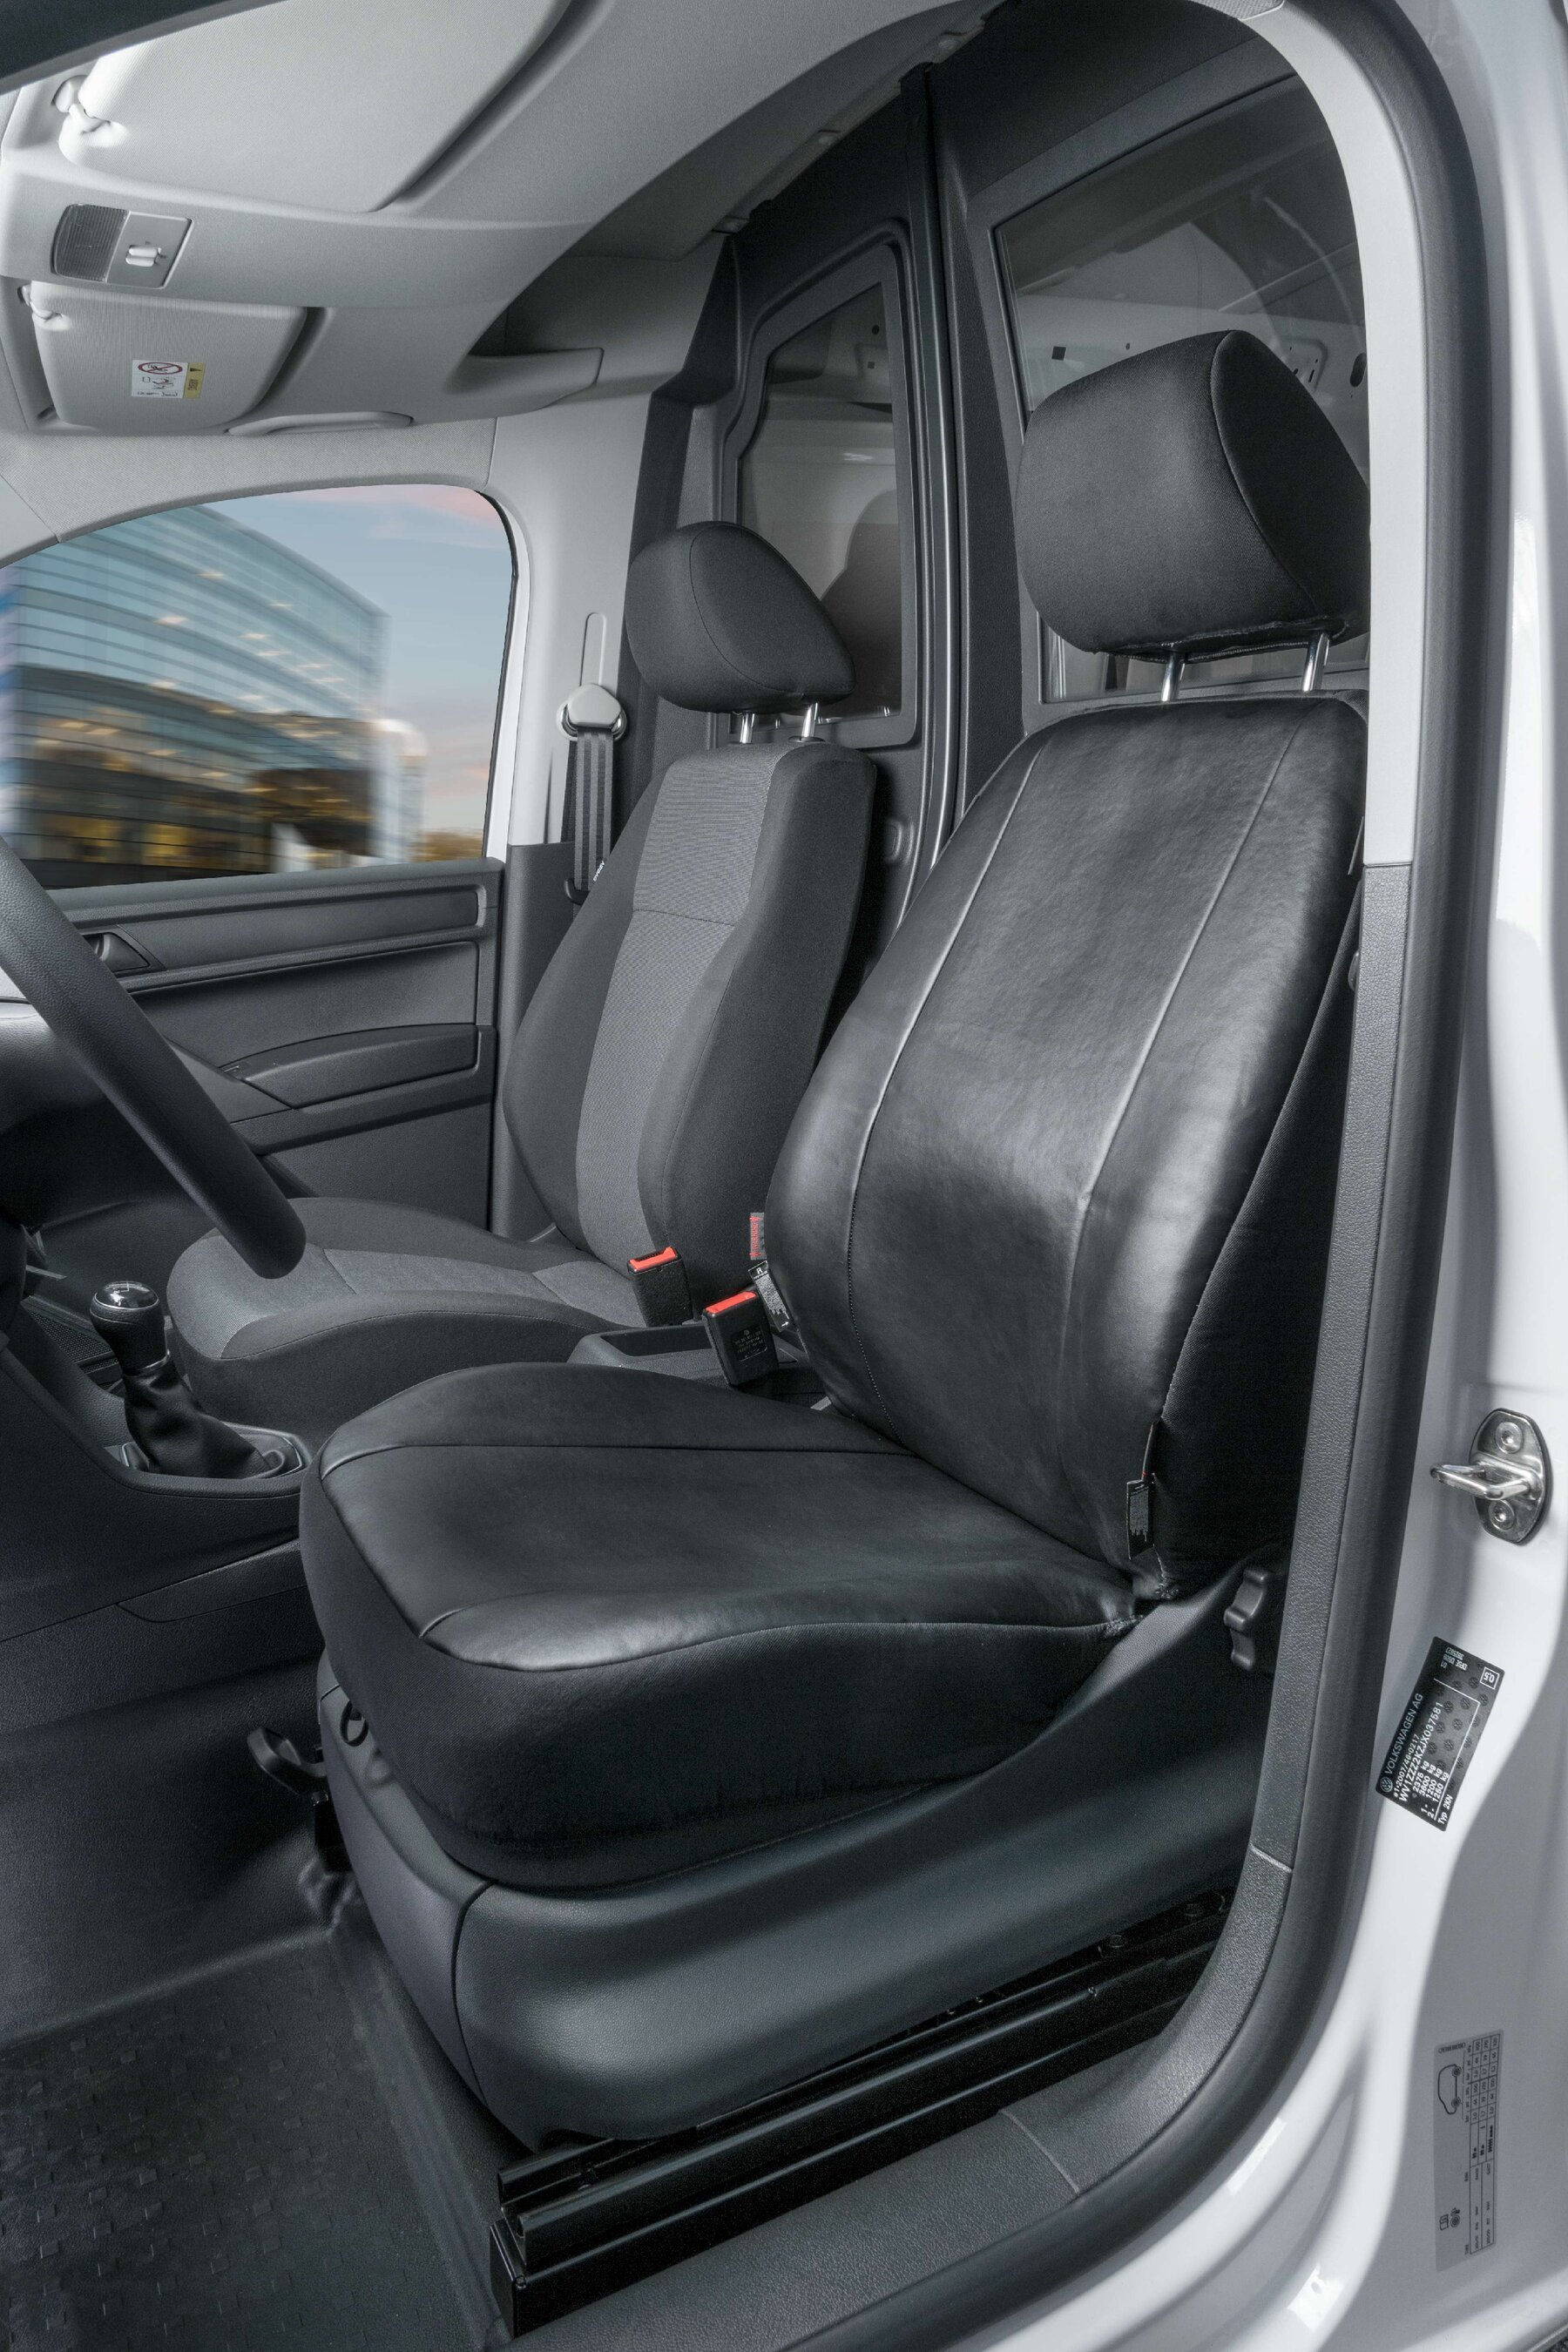 Seat cover made of imitation leather for VW Caddy, single seat cover front